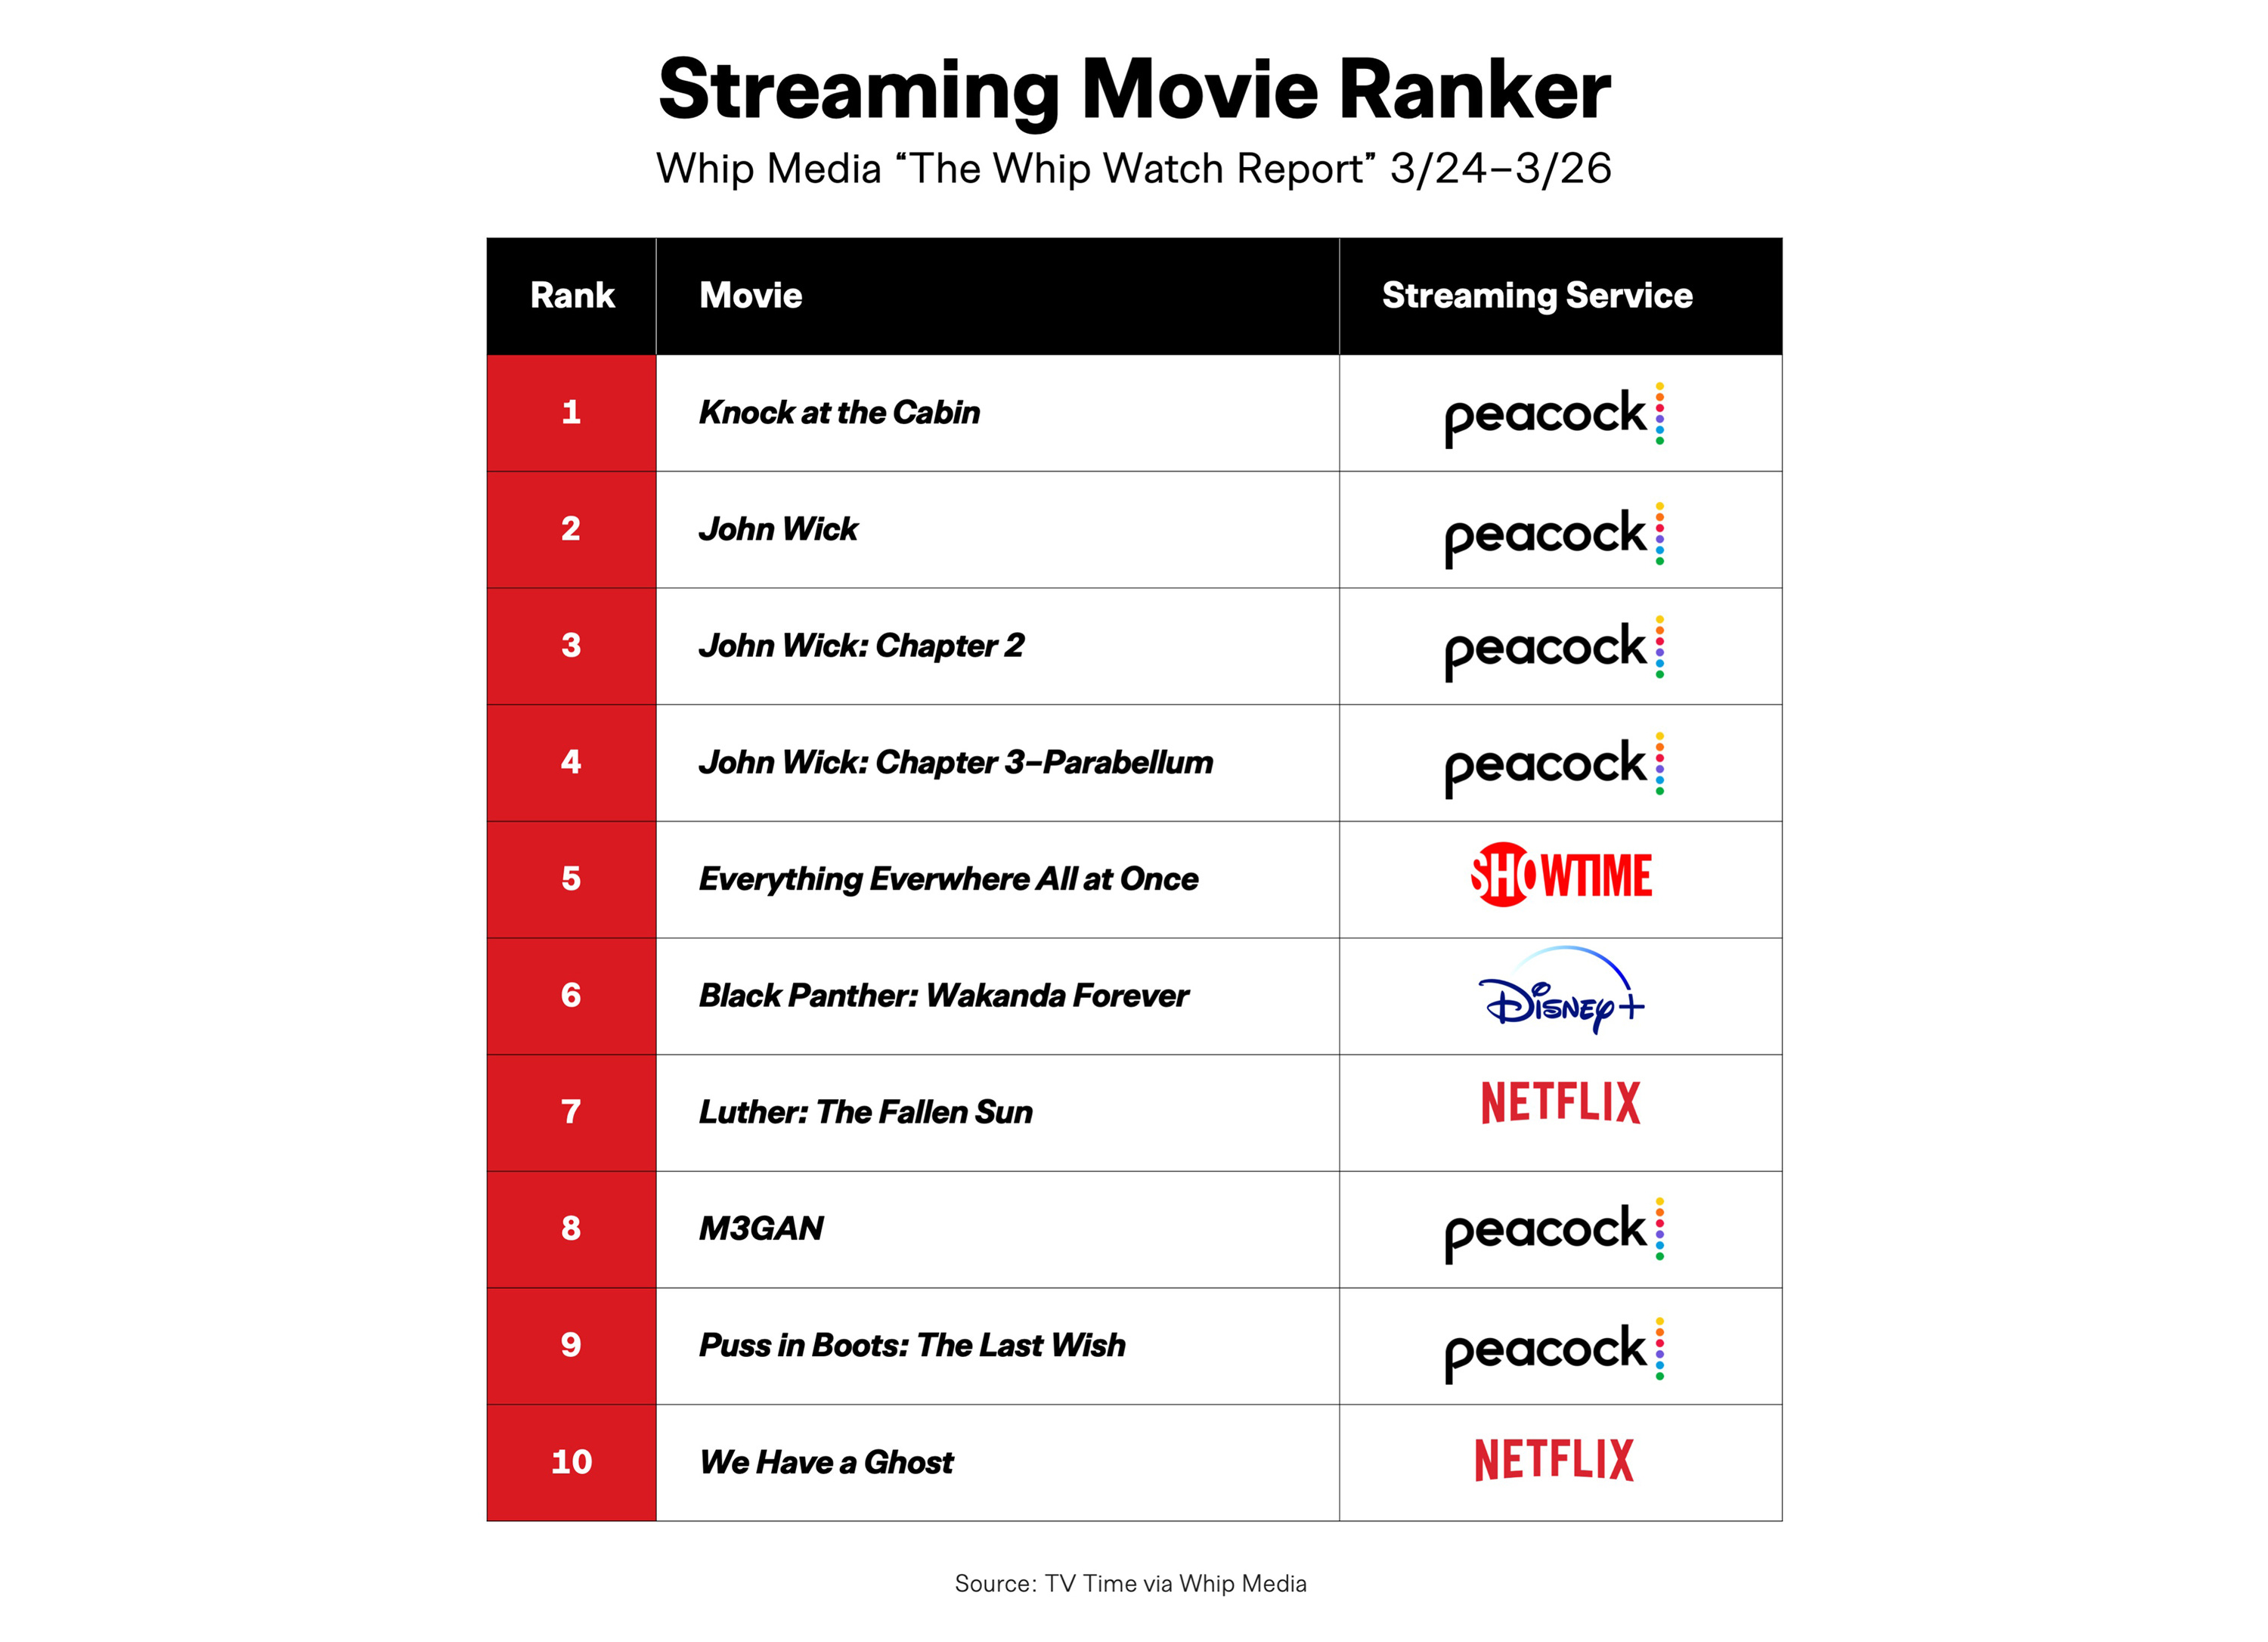 Shows Available on Netflix, Disney+, Streaming Services Surge, Nielsen Says  - Bloomberg